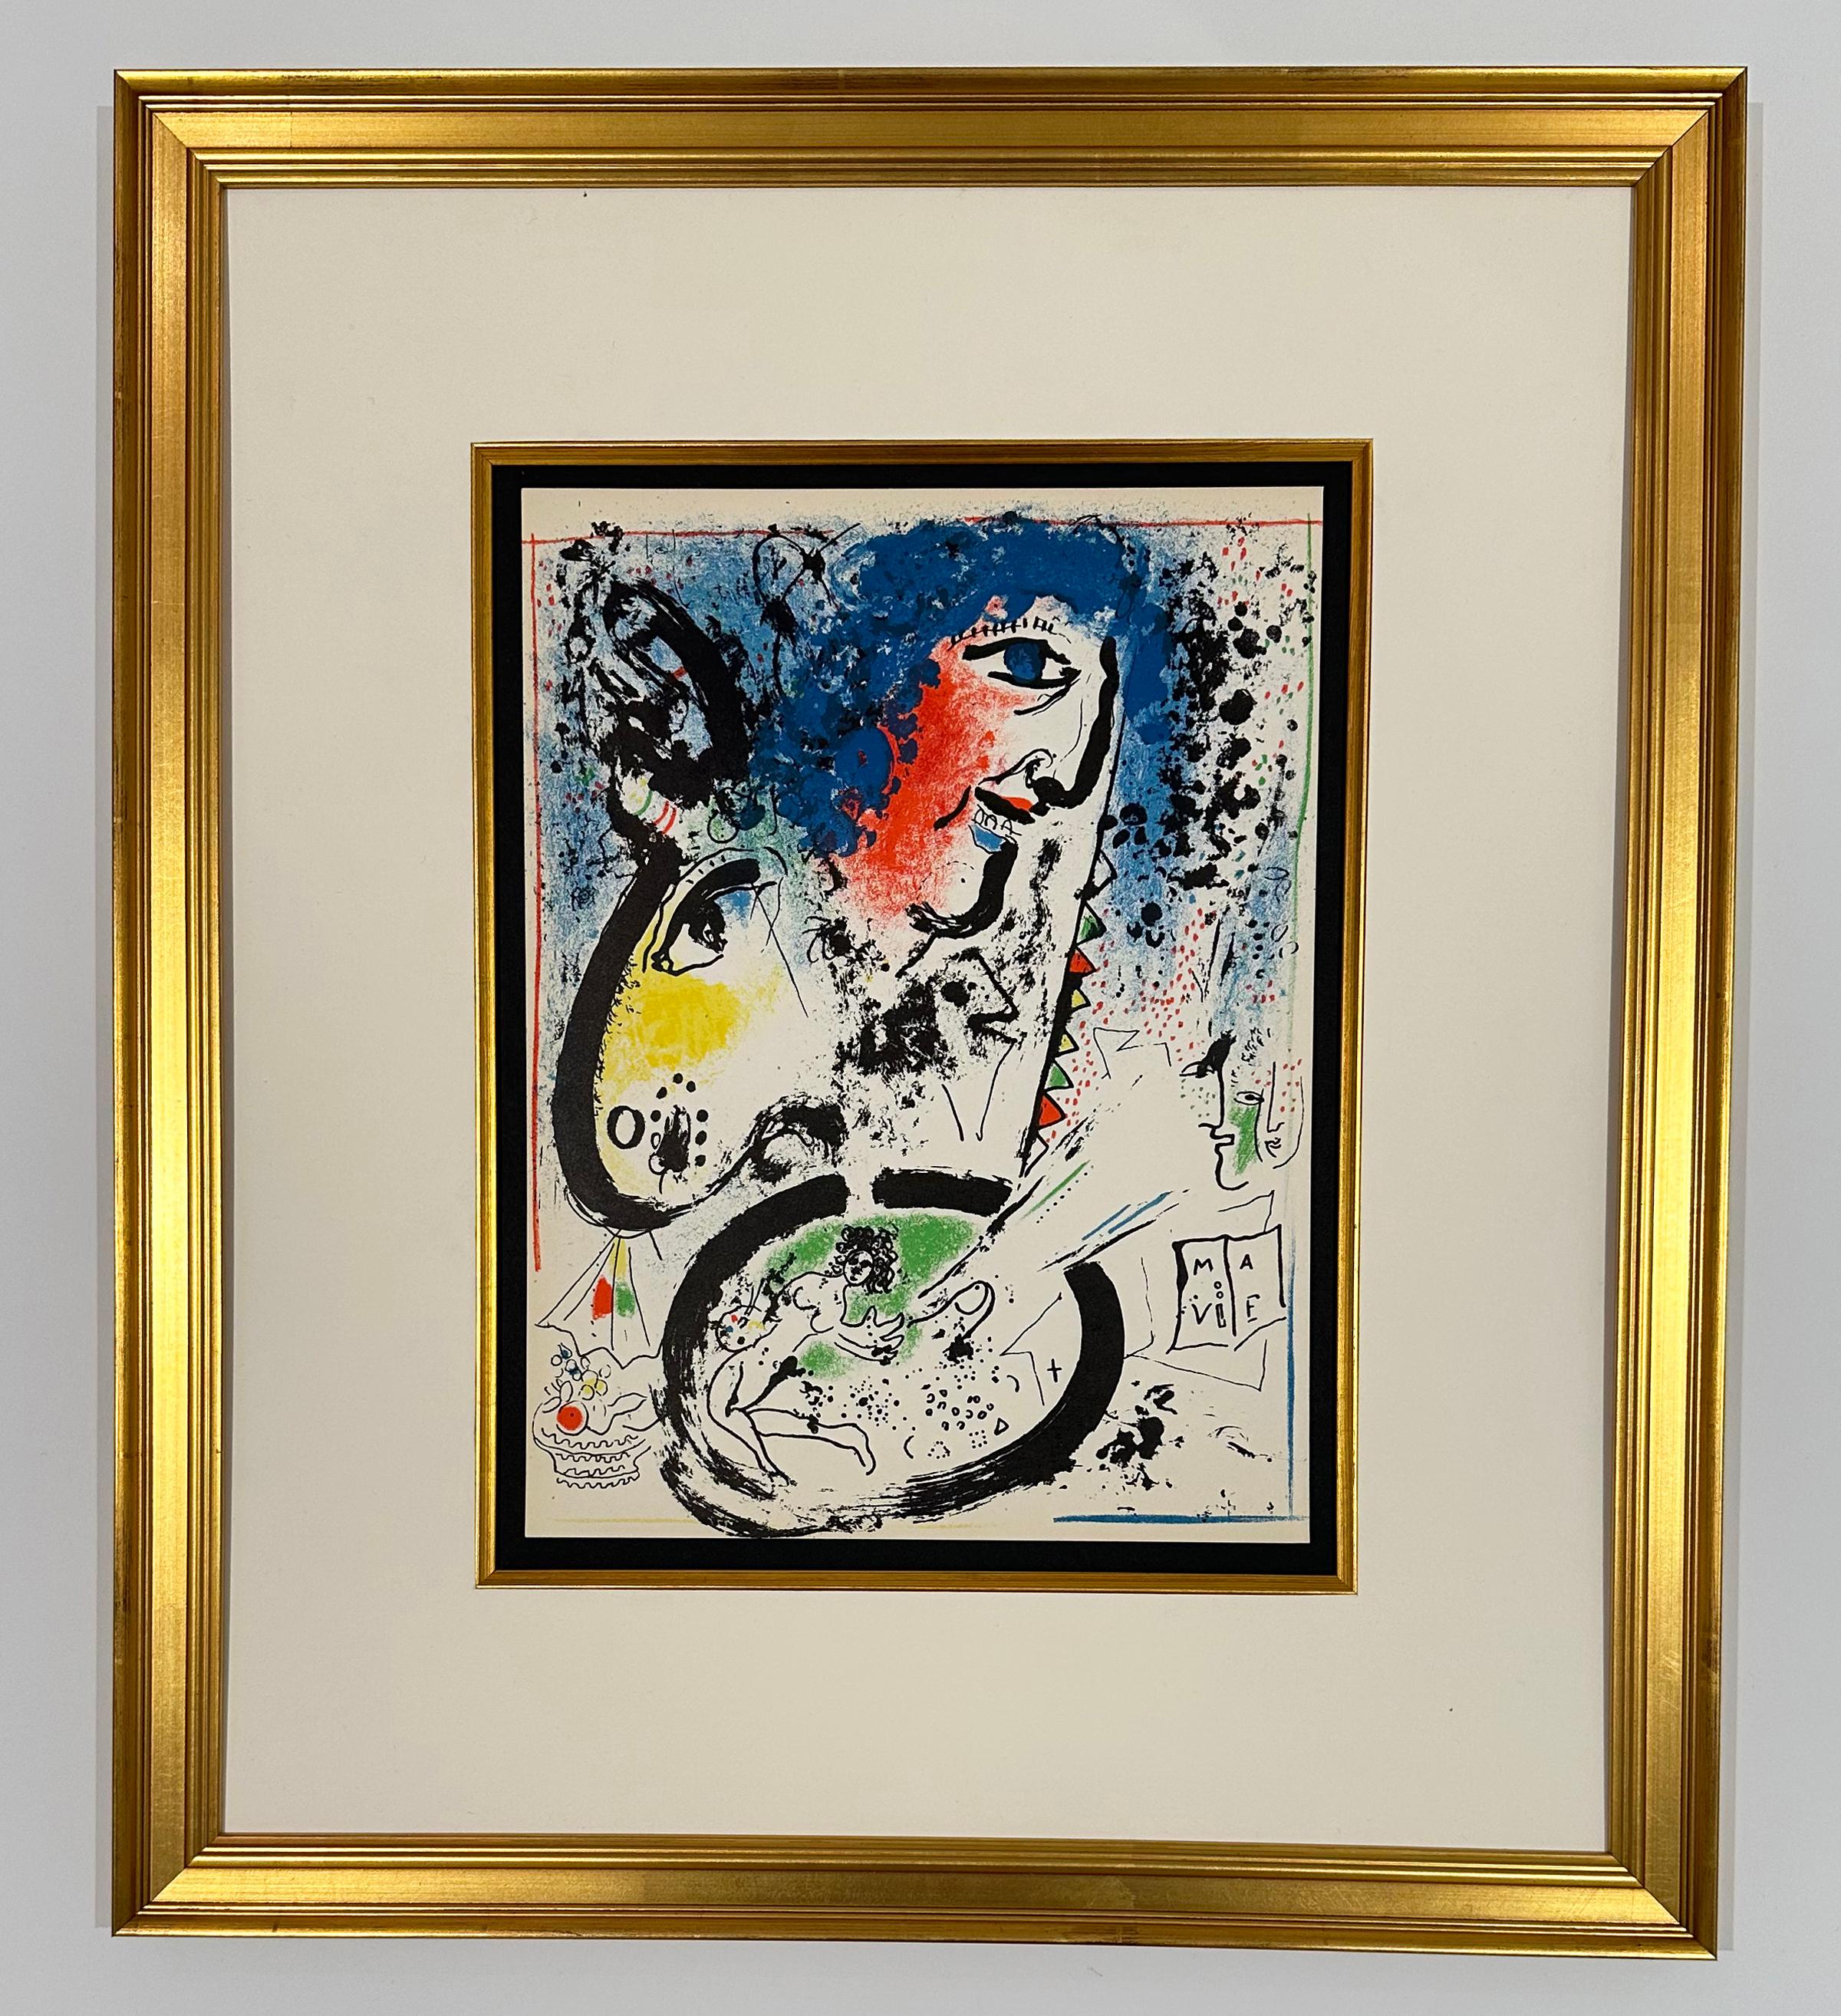 Self-Portrait (Frontispiece), from 1960 Mourlot Lithographe I - Print by Marc Chagall